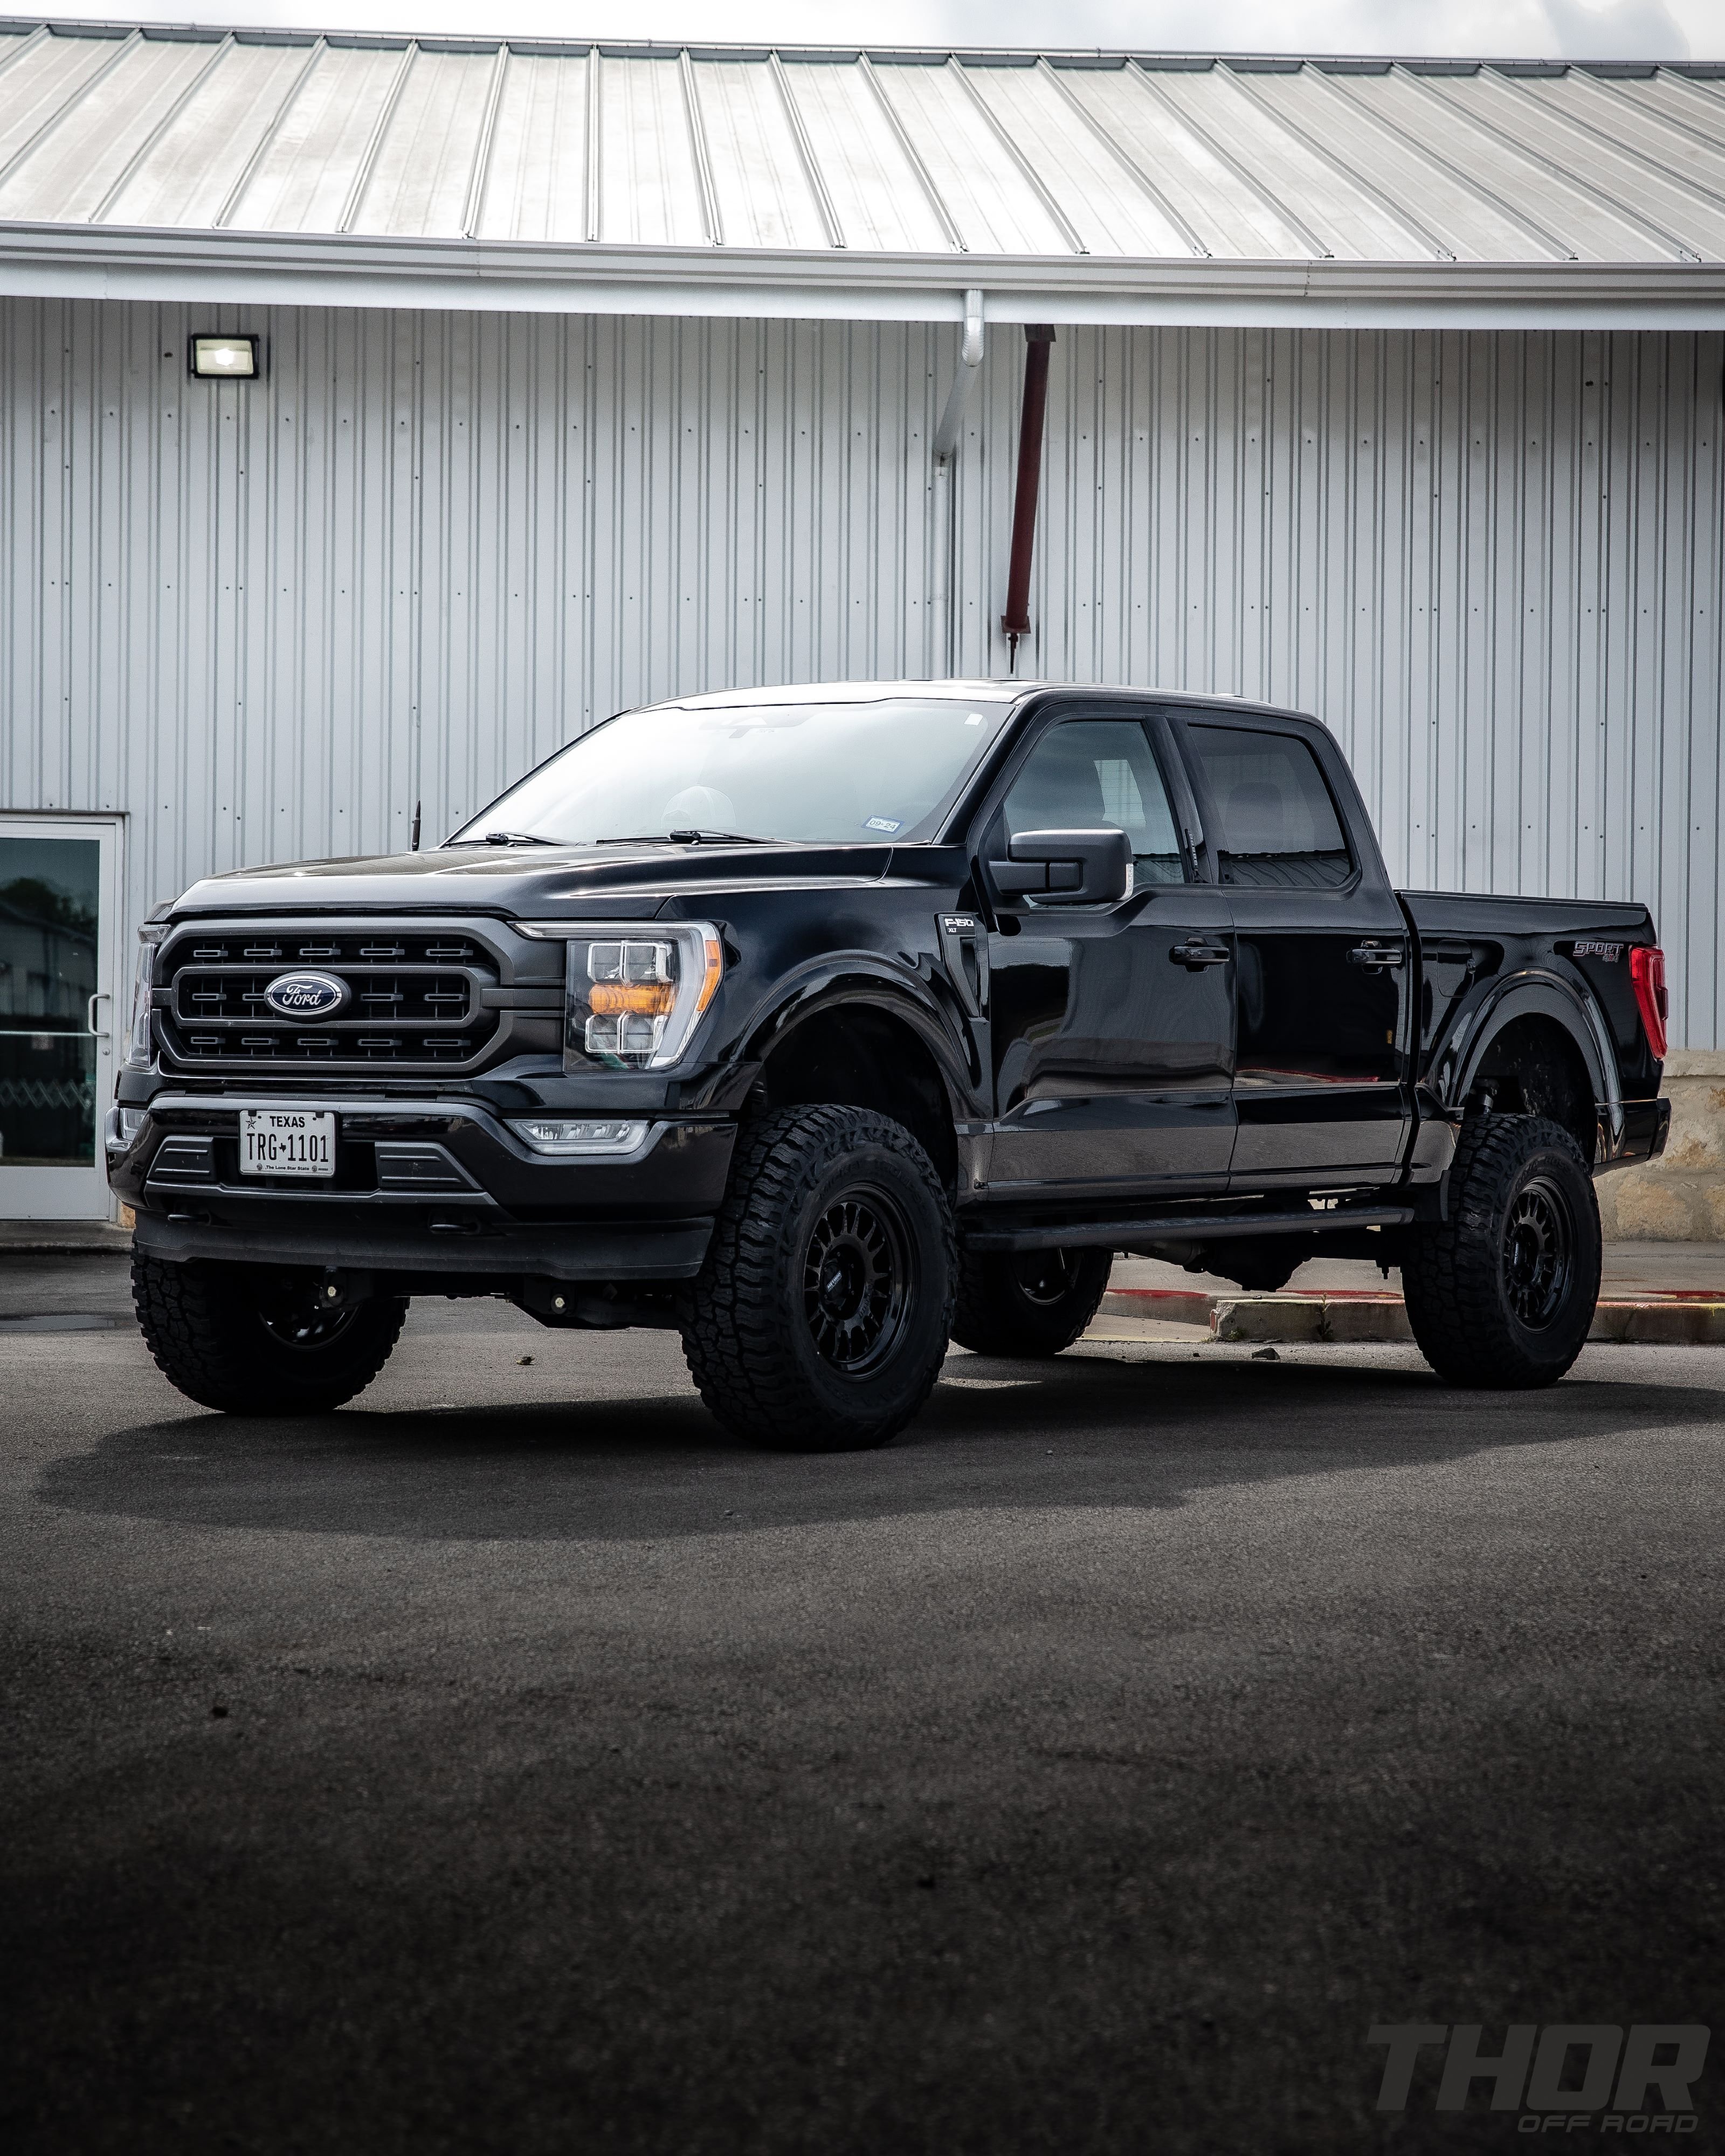 2023 Ford F-150 XLT in Black with BDS 6" Lift Kit, 35x12.50R18 Mickey Thompson Baja Boss AT Tires, Method MR318 18x9" Wheels